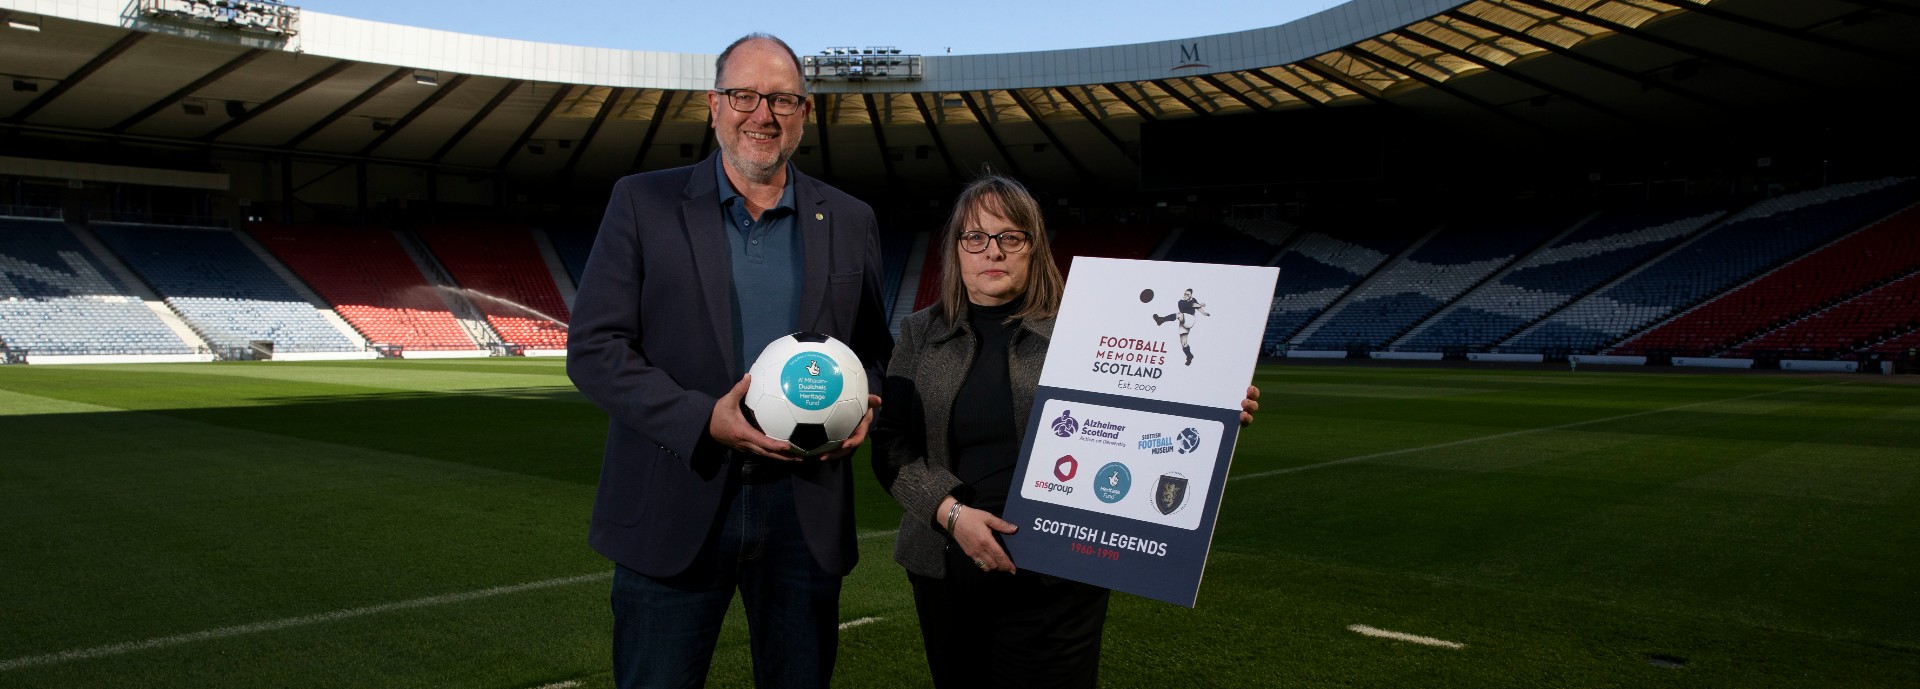 Richard Haynes and Karen Fraser standing on a football pitch with stadium seating in the background. Richard holds a football and Karen holds a large board advertising the 